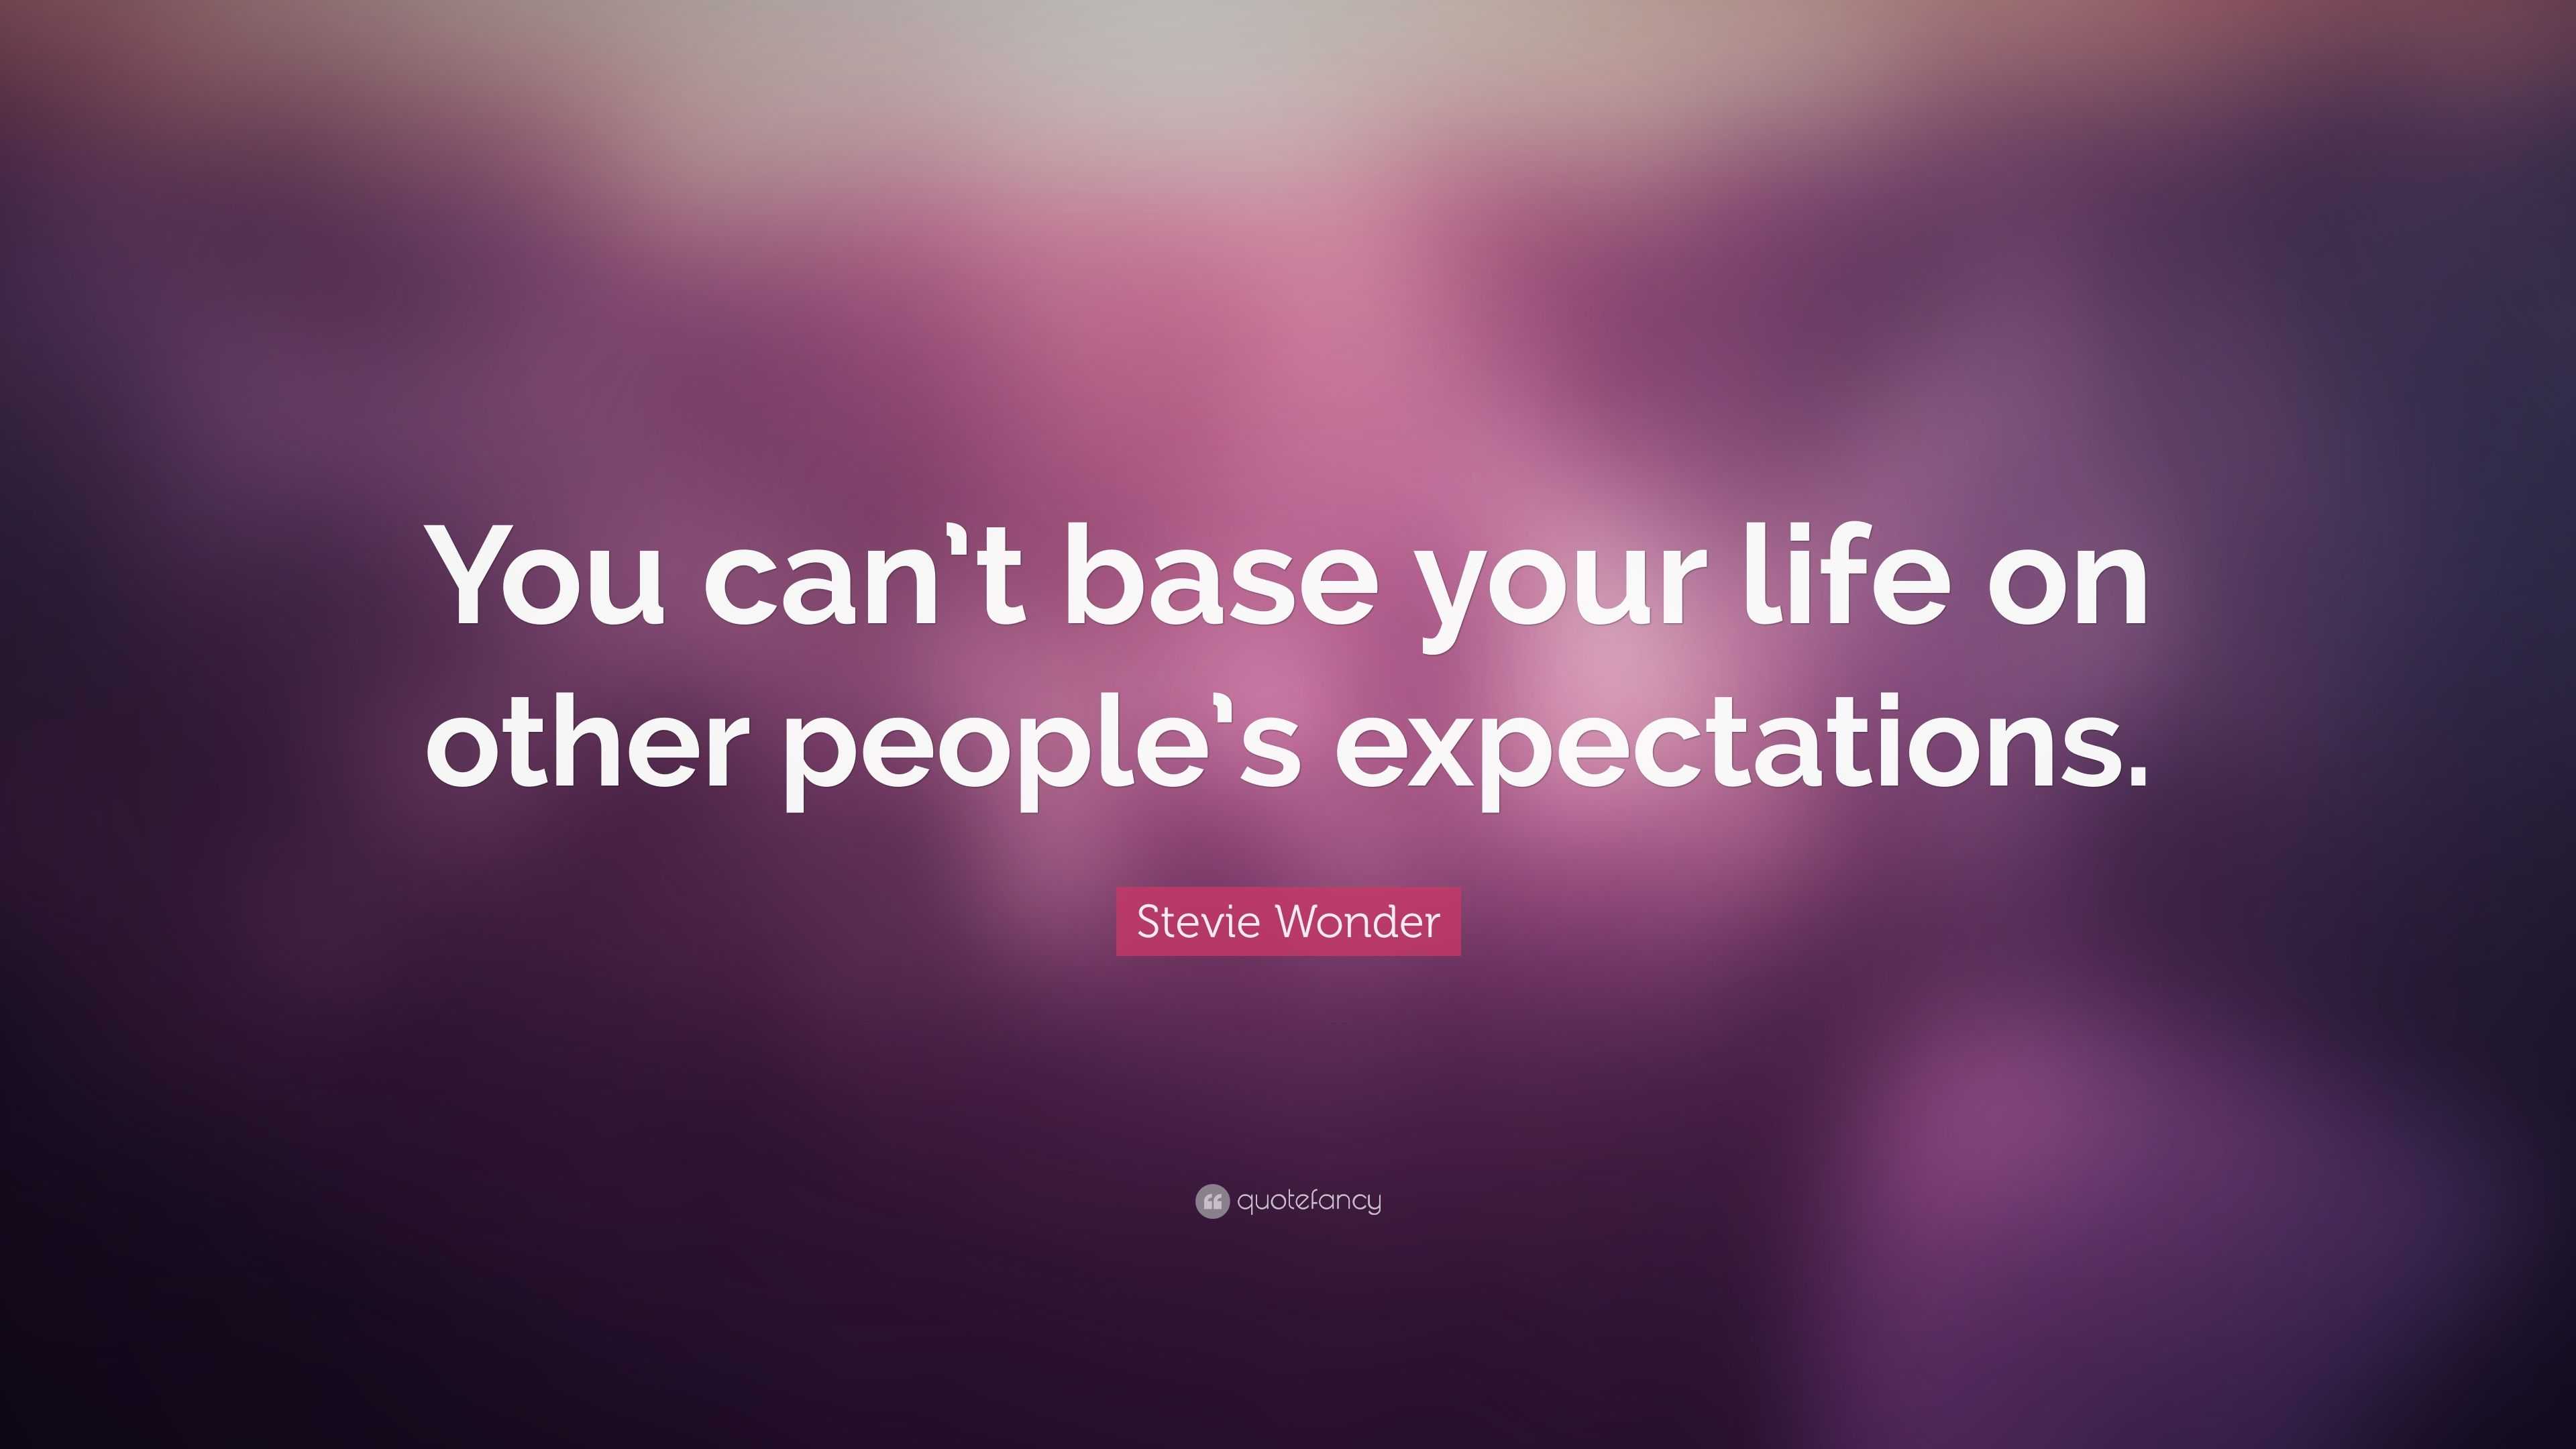 Stevie Wonder Quote: “You can’t base your life on other people’s ...